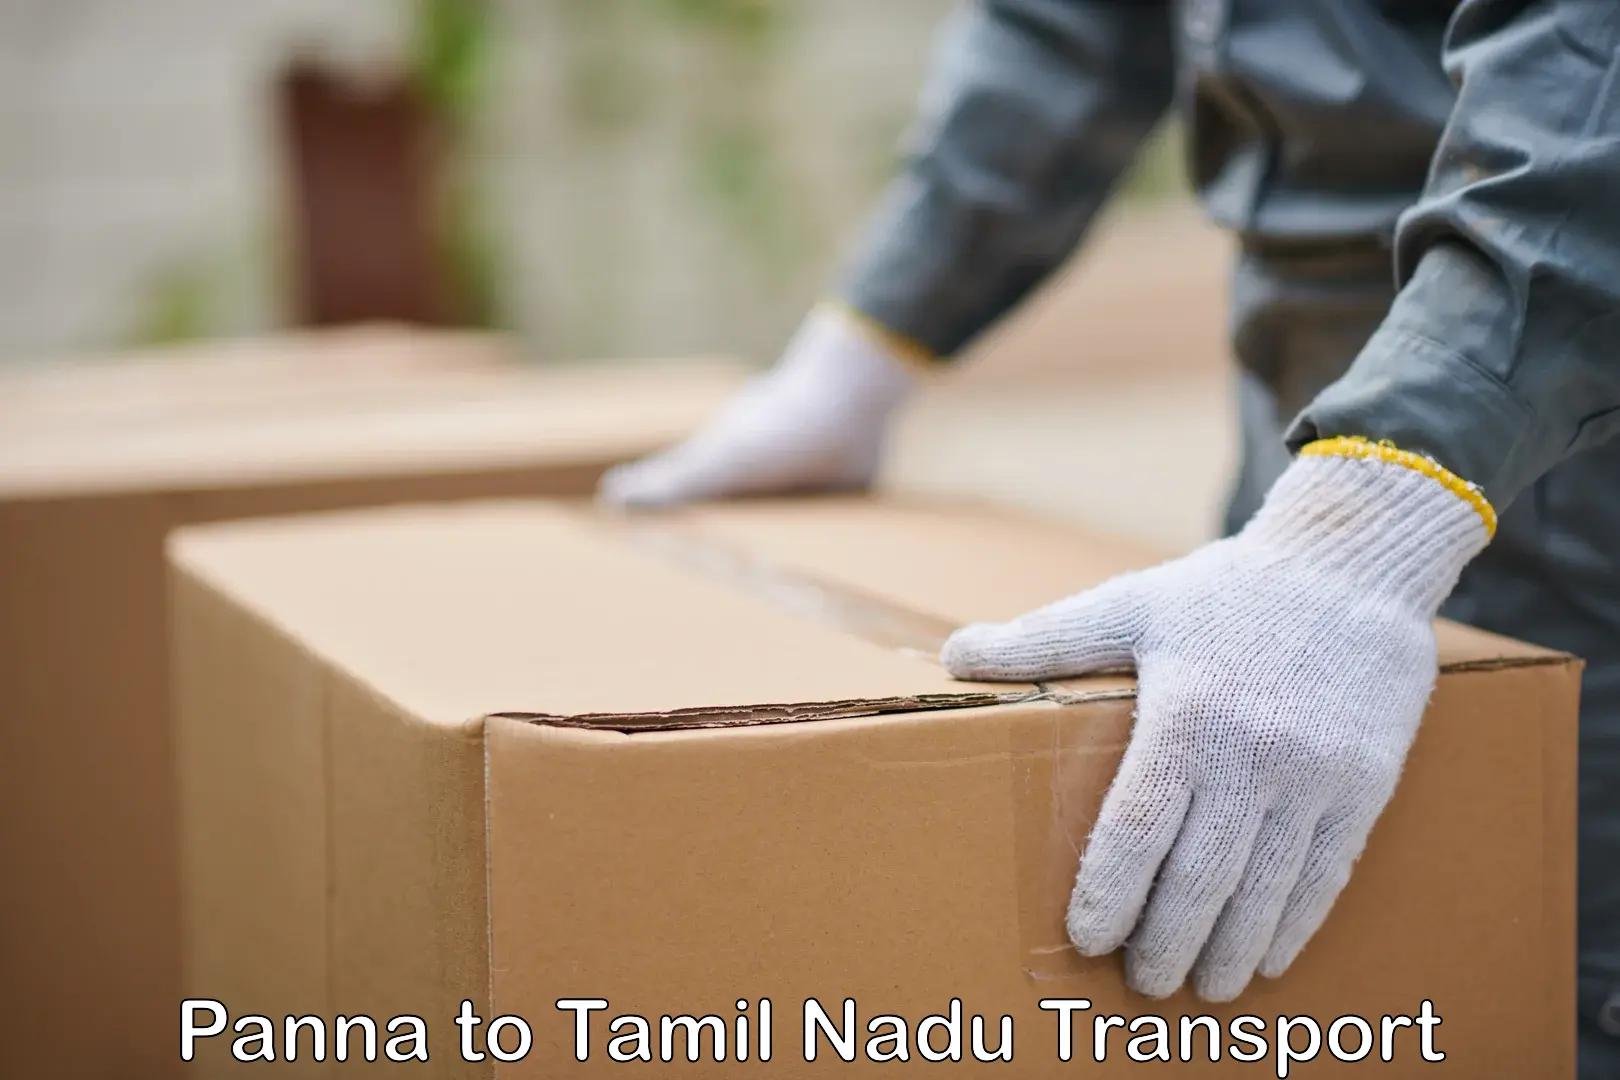 Container transport service Panna to Chennai Port